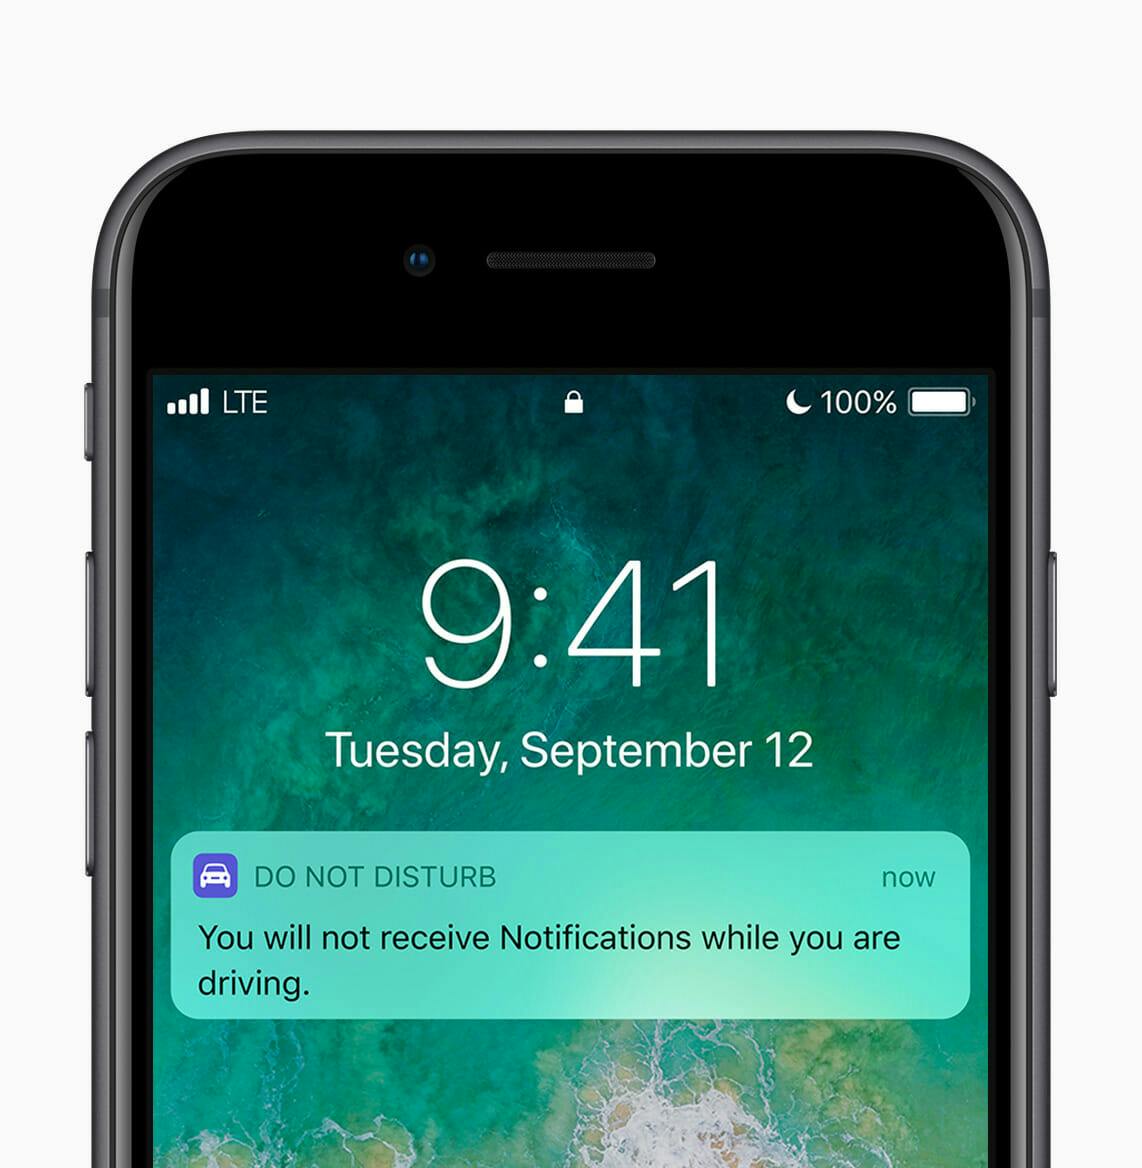 ios 11 features : Do Not Disturb while driving screen grab